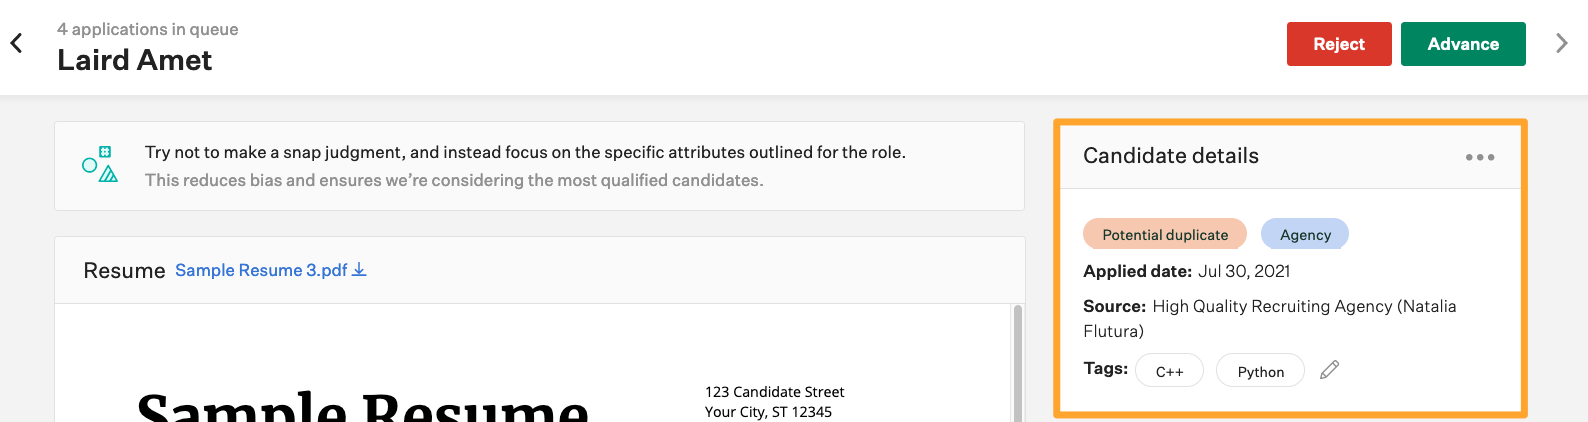 Candidate_Details.png